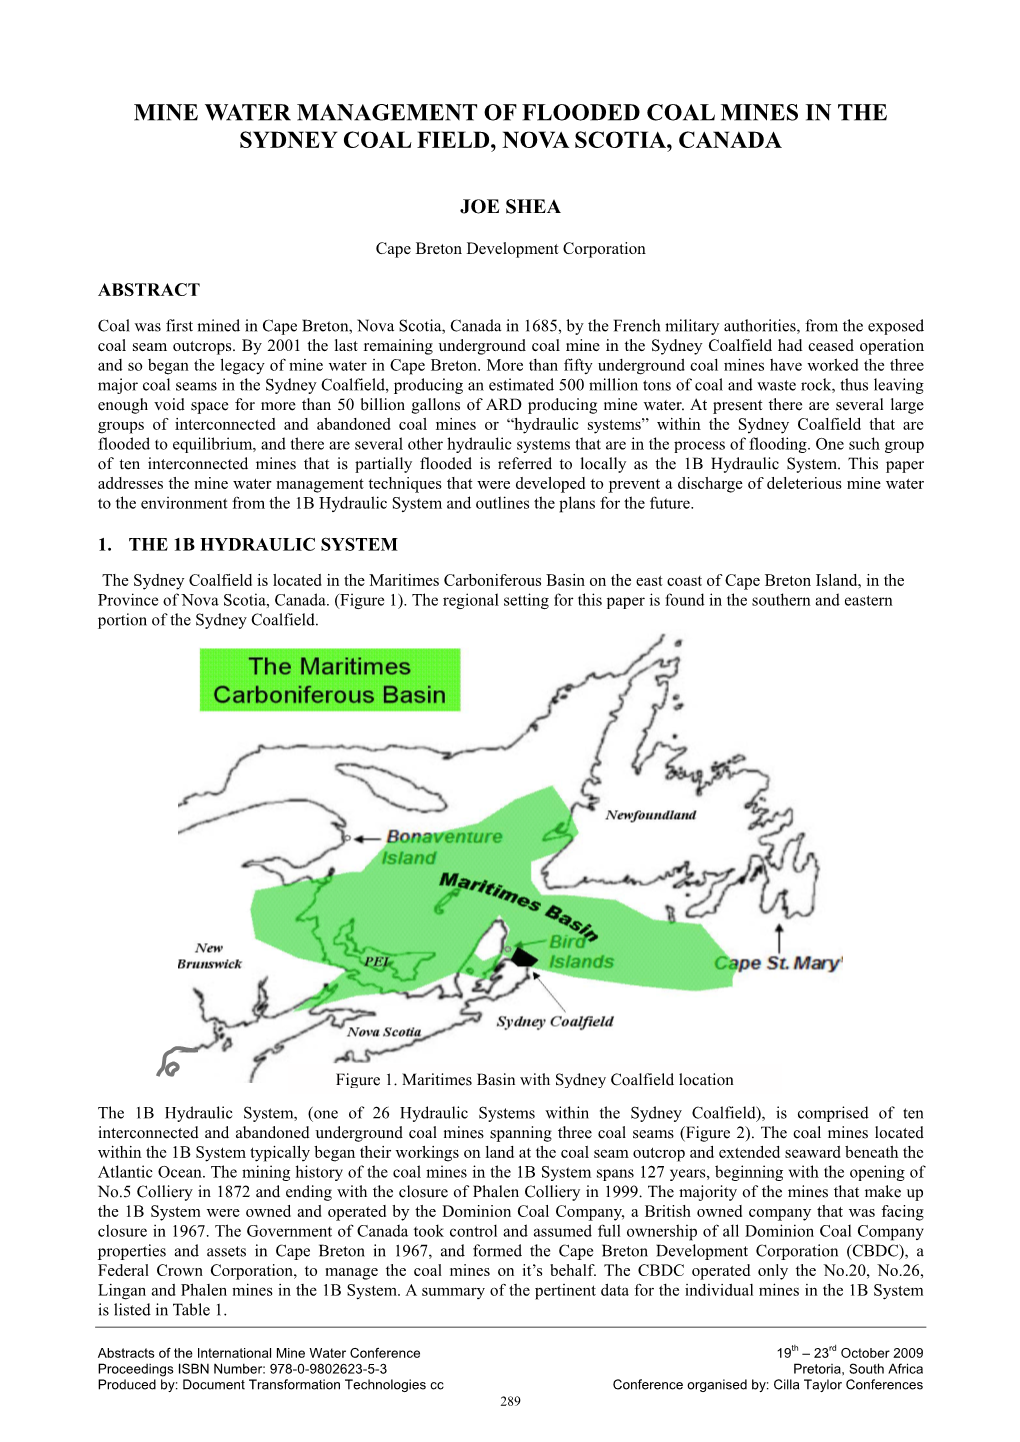 Mine Water Management of Flooded Coal Mines in the Sydney Coal Field, Nova Scotia, Canada